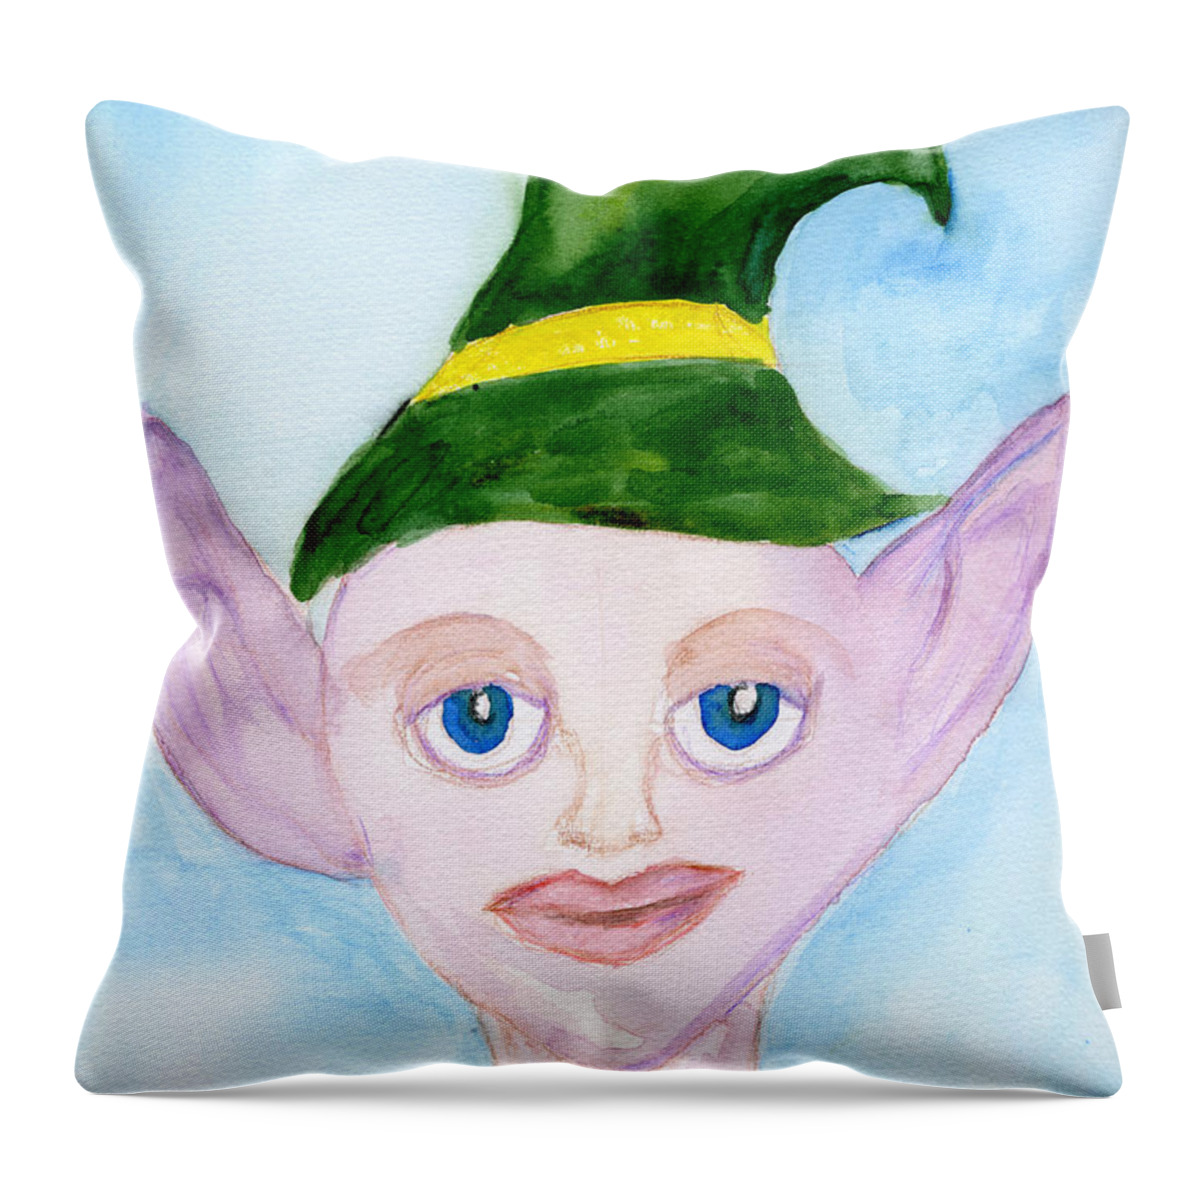 Portrait Throw Pillow featuring the painting Mystic Friend by Julia Stubbe